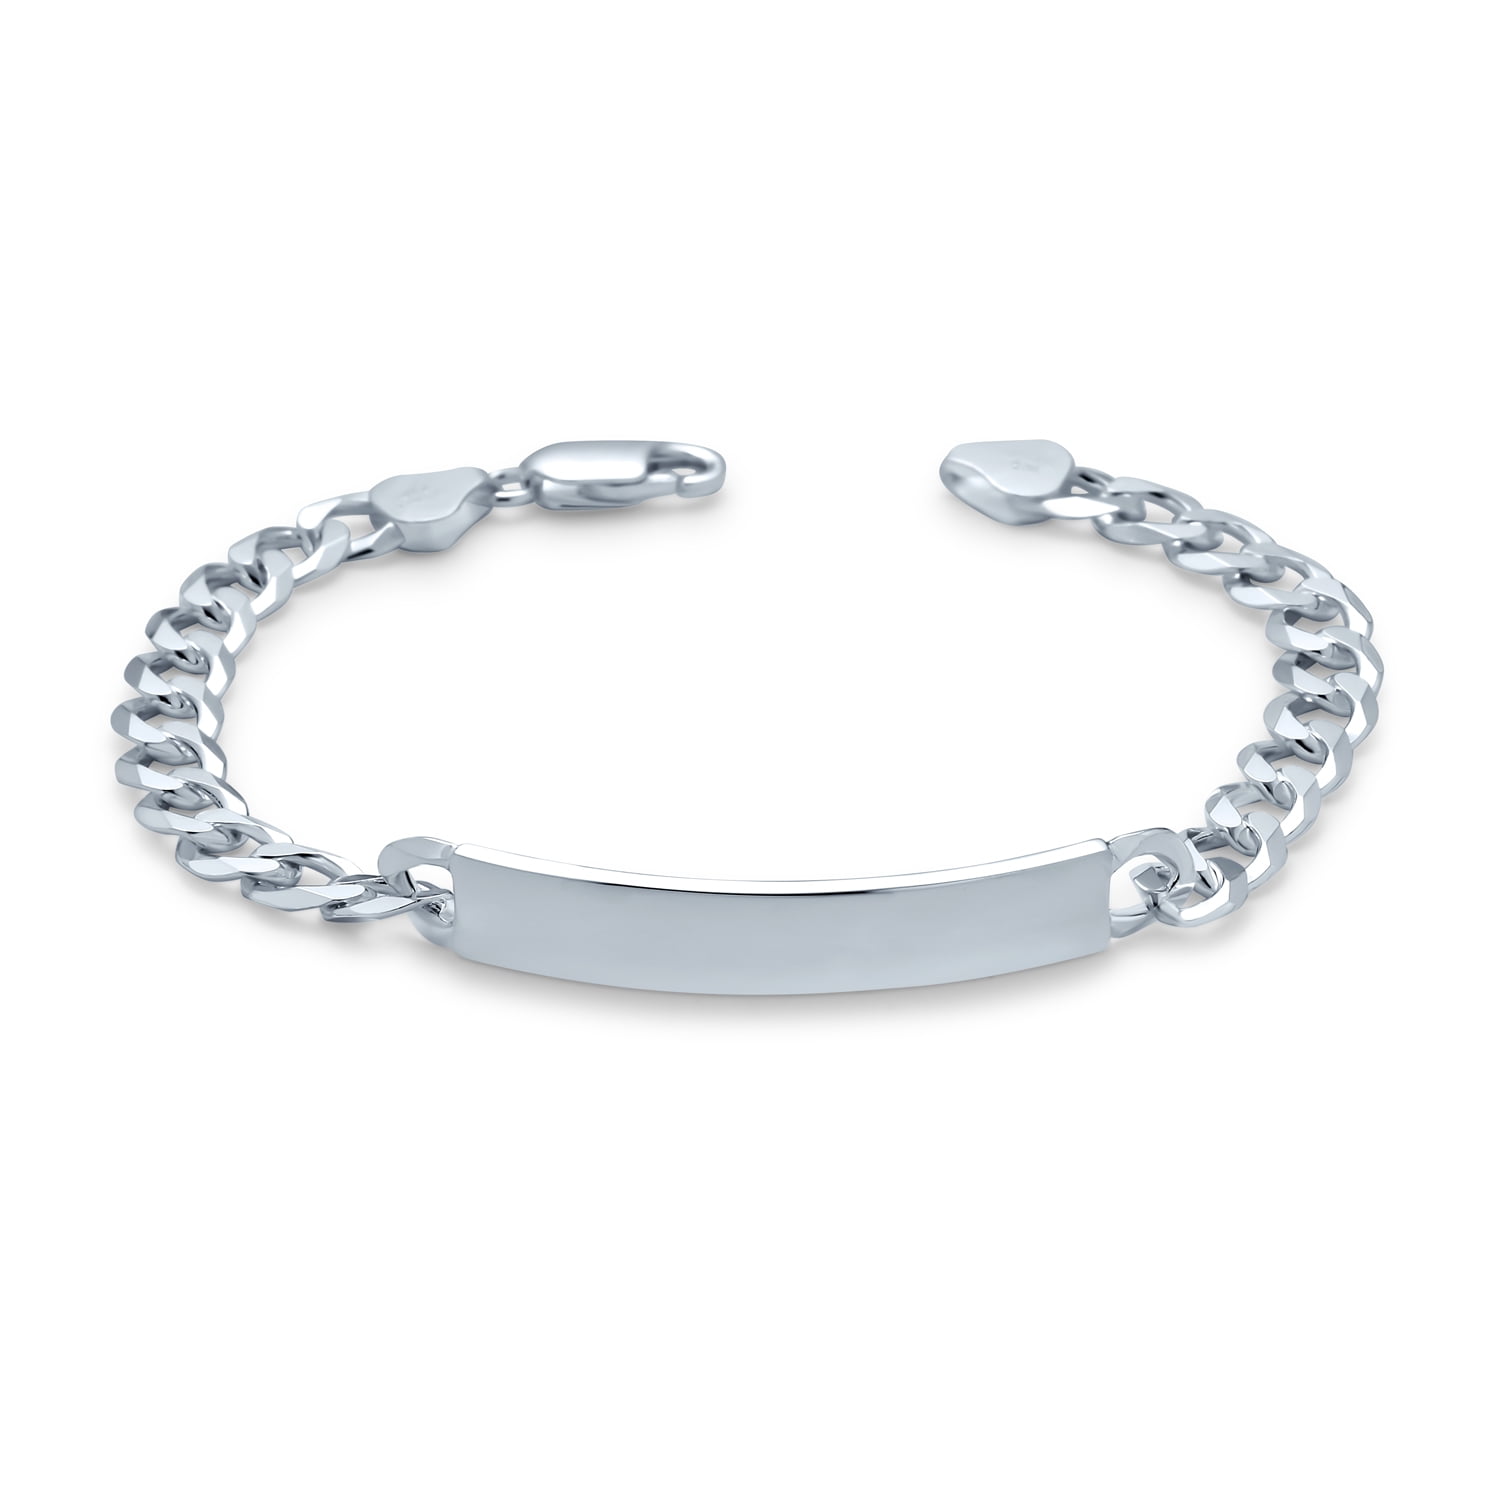 Jewel Tie 925 Sterling Silver Cuban Curb ID Bracelet with Secure Lobster Lock Clasp 5mm 